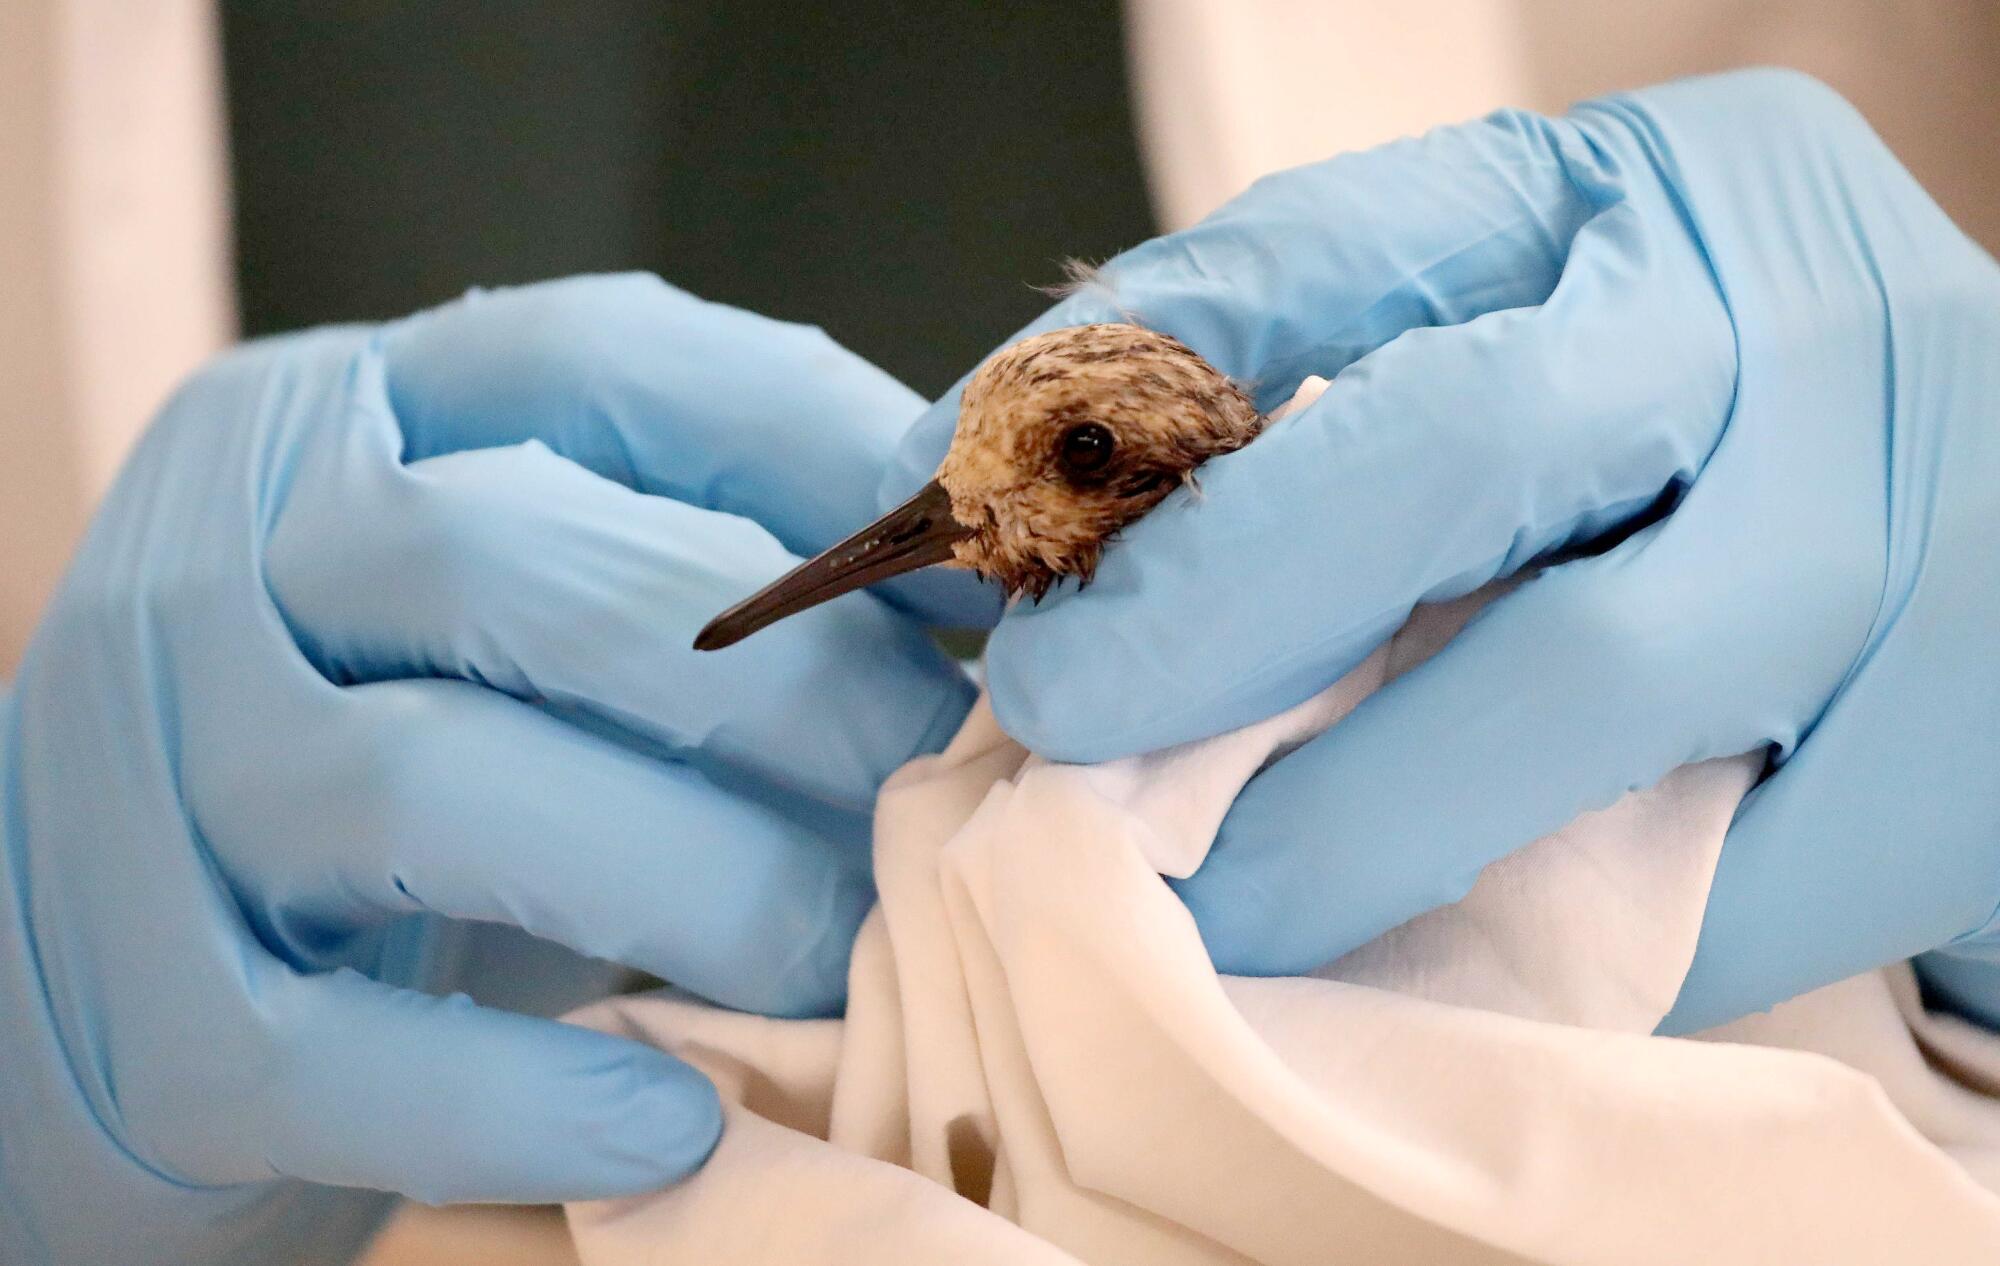 An oily bird is held in a pair of gloved hands 